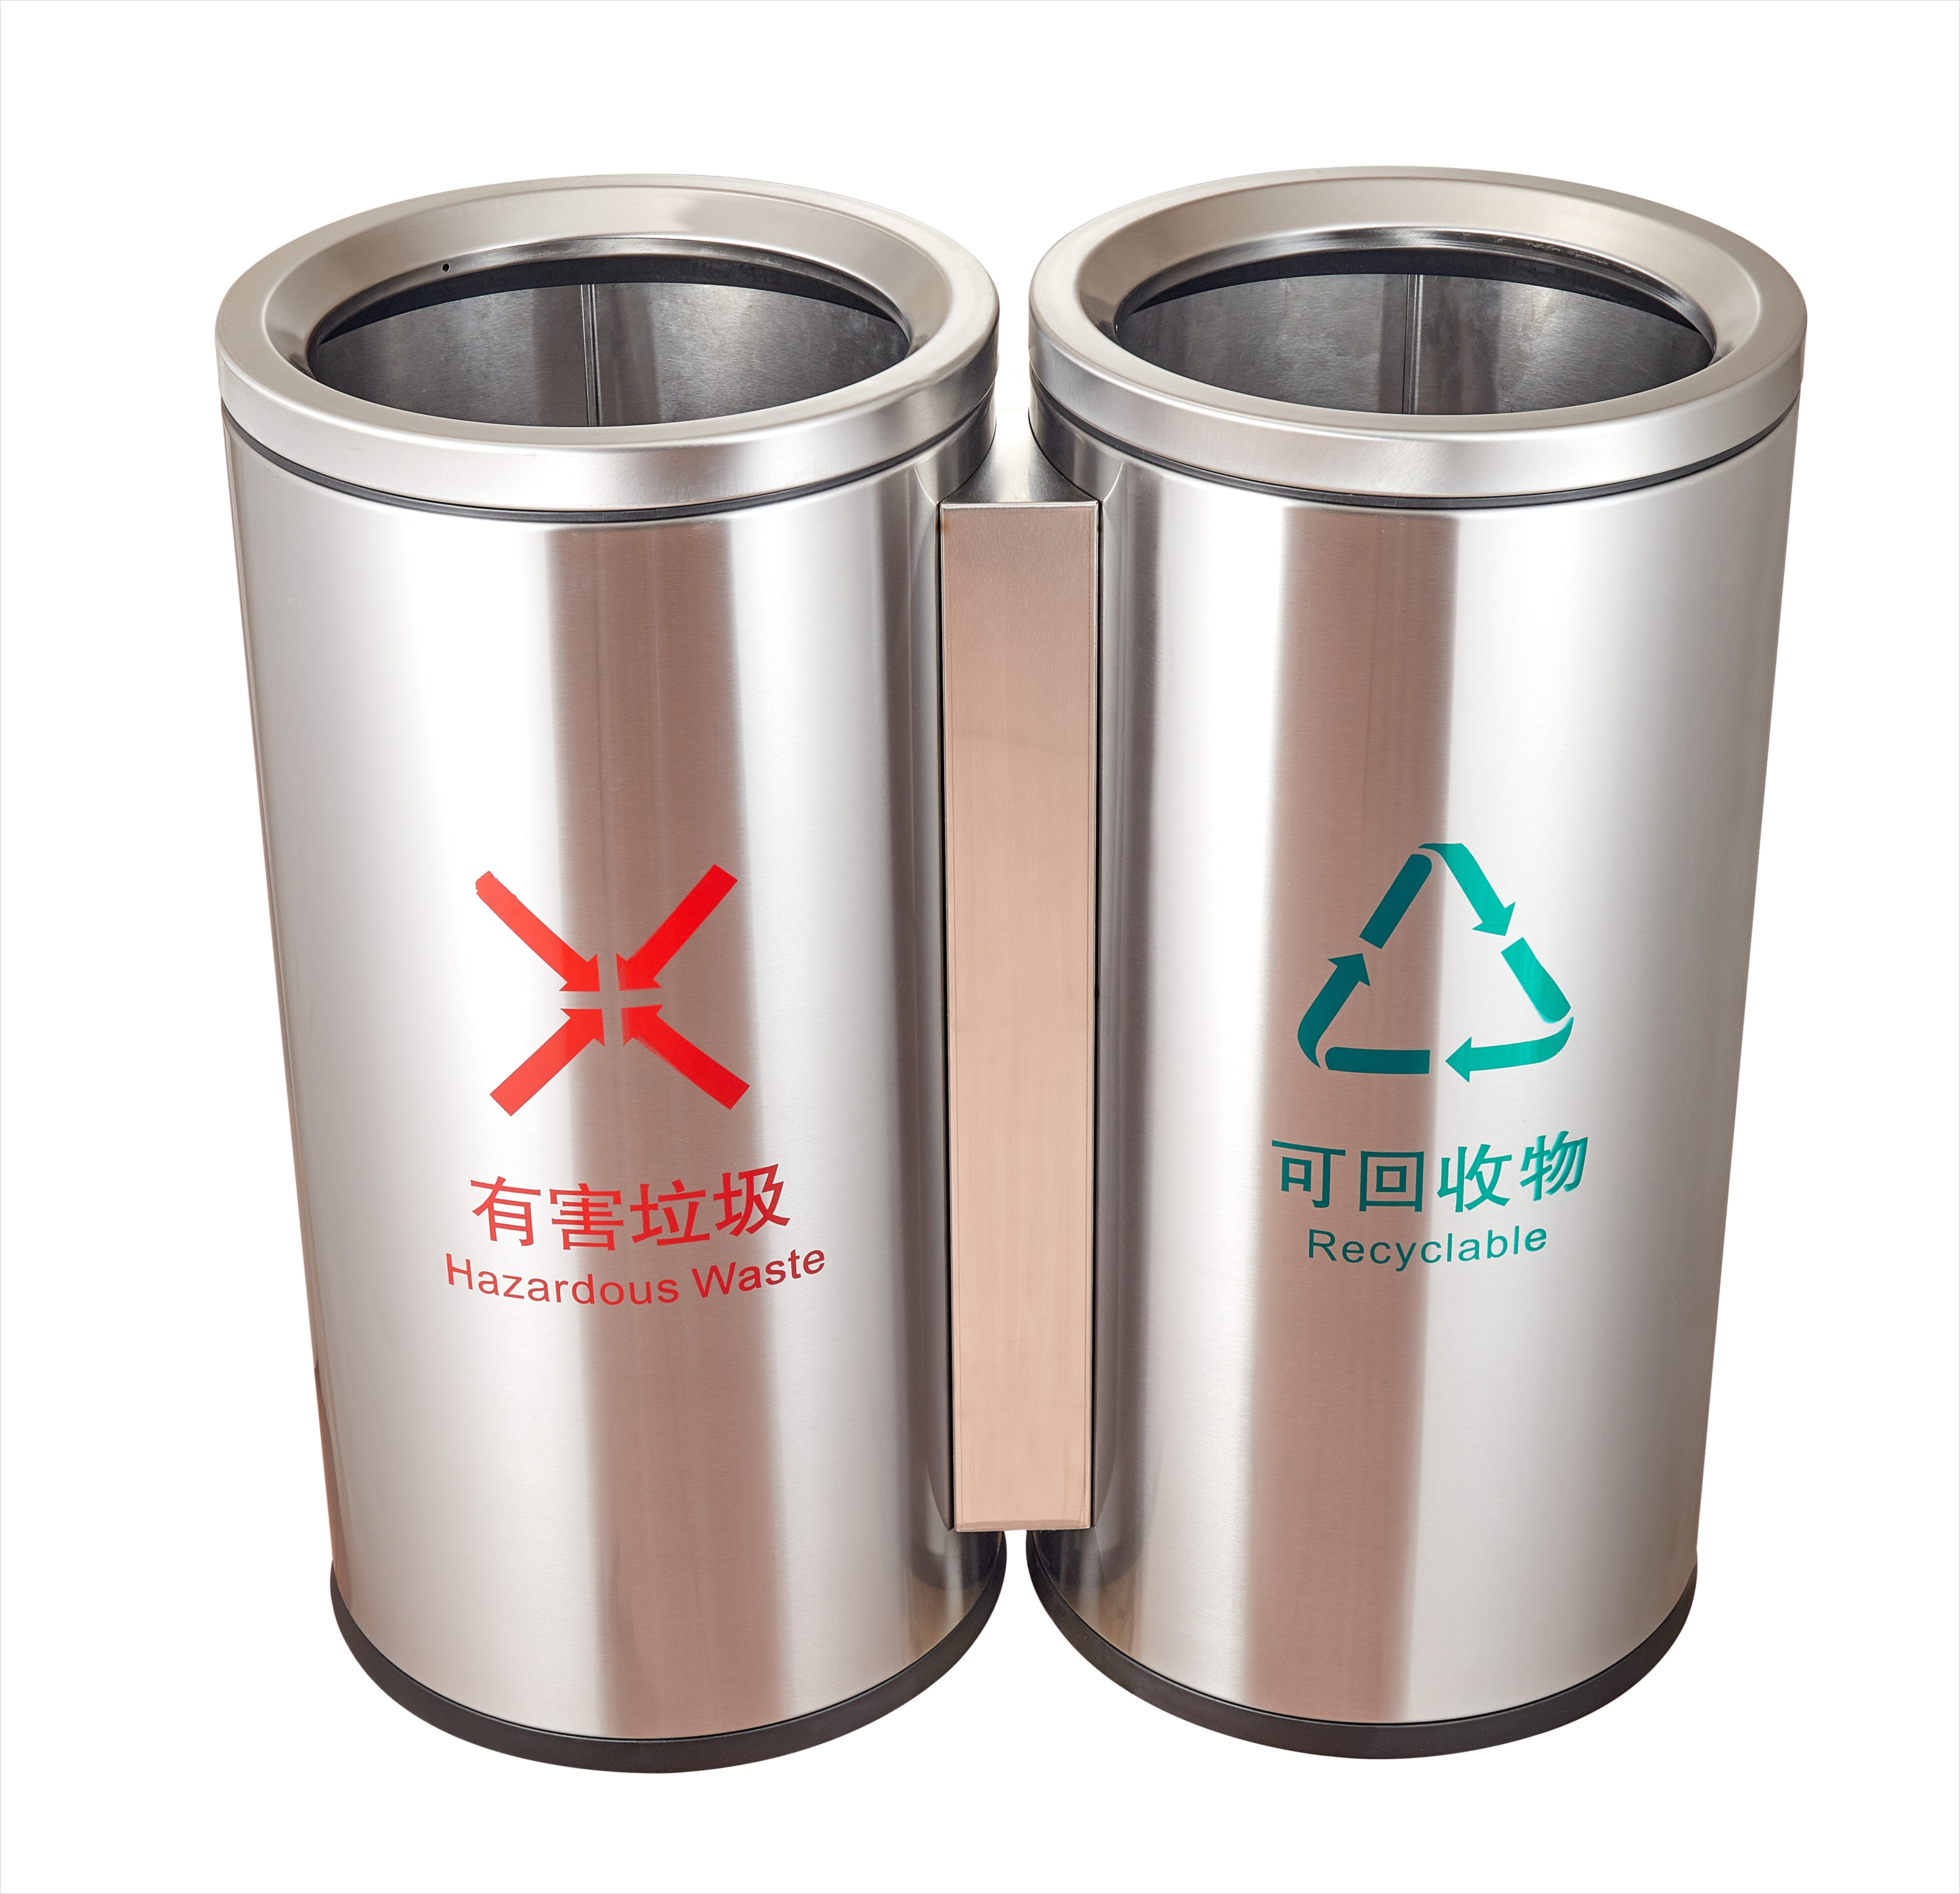 2in1 Rounded Stainless Steel Trash can with Flip lid